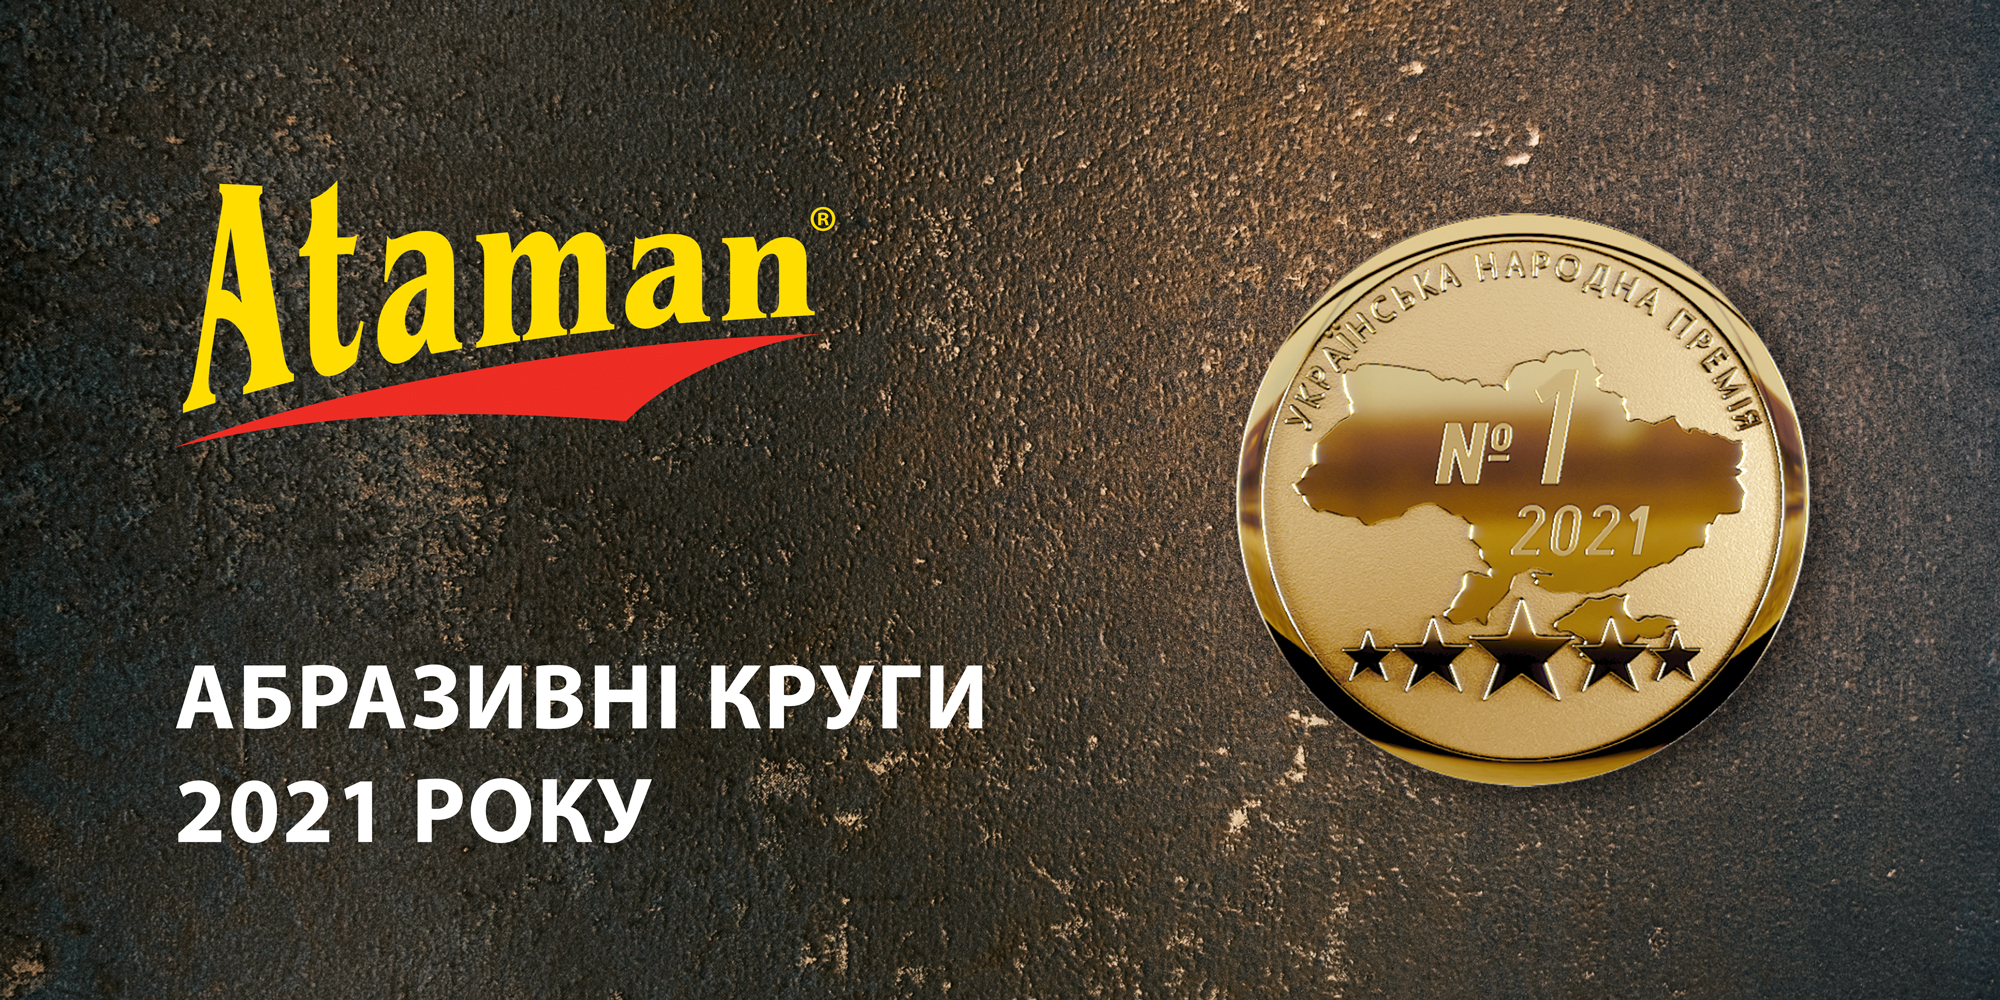 TM Ataman has been holding a leadership position for the third year according to the results of the All-Ukrainian vote!